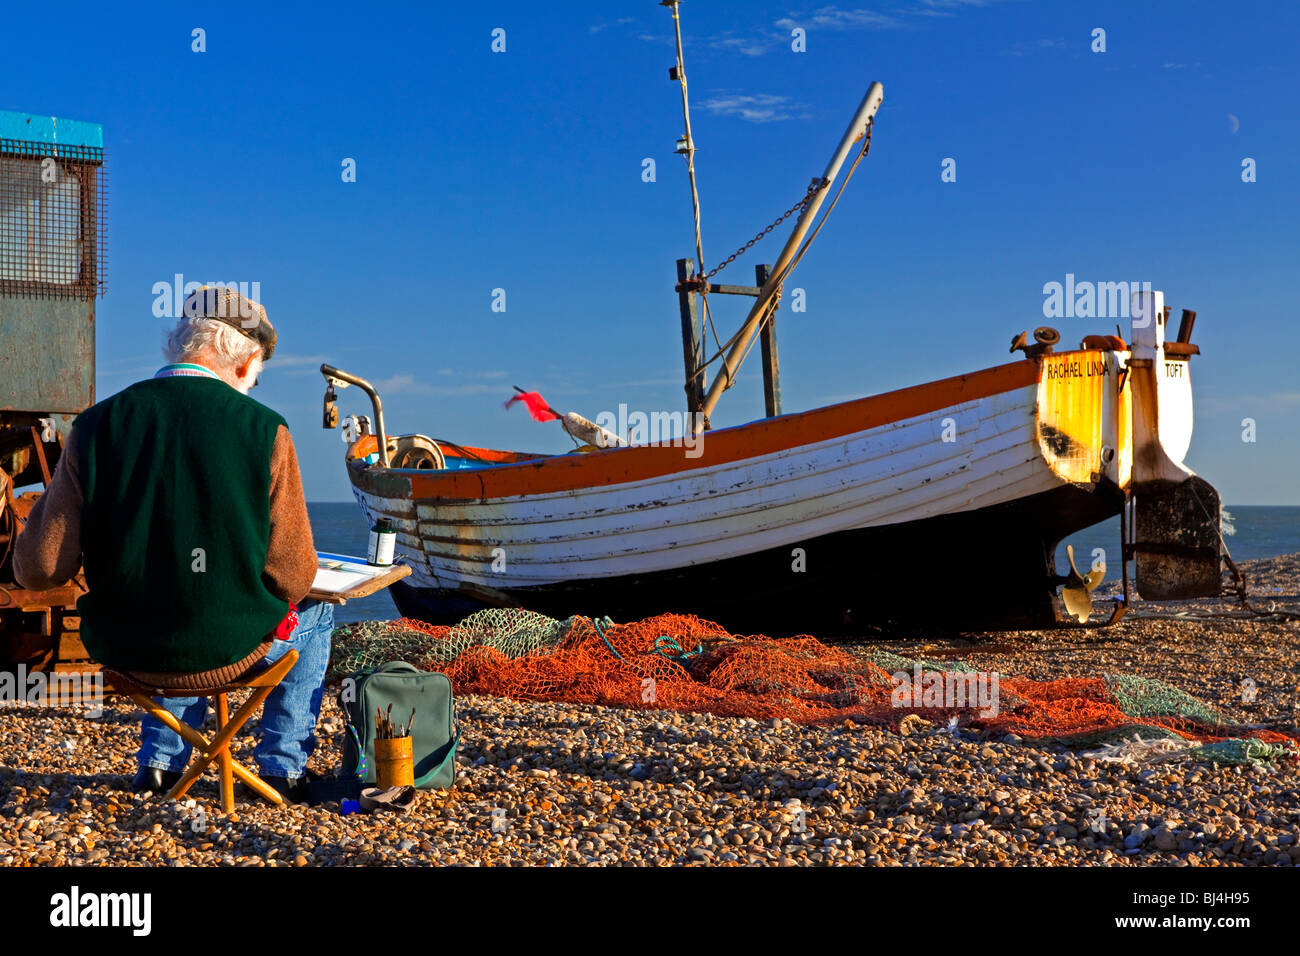 Artist painting fishing boat on the beach at Aldeburgh a fishing town in Suffolk East Anglia England UK Stock Photo